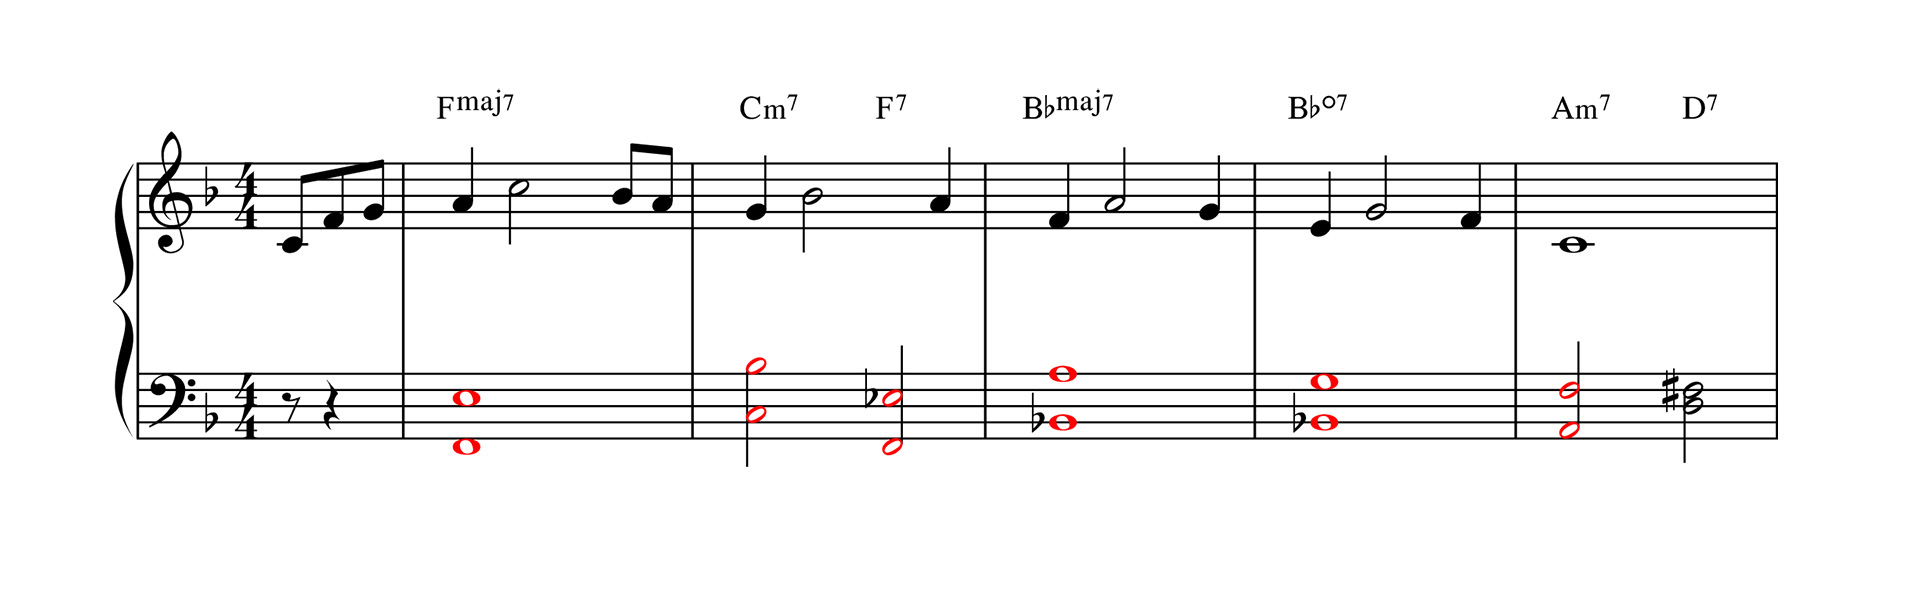 shell voicings for jazz piano